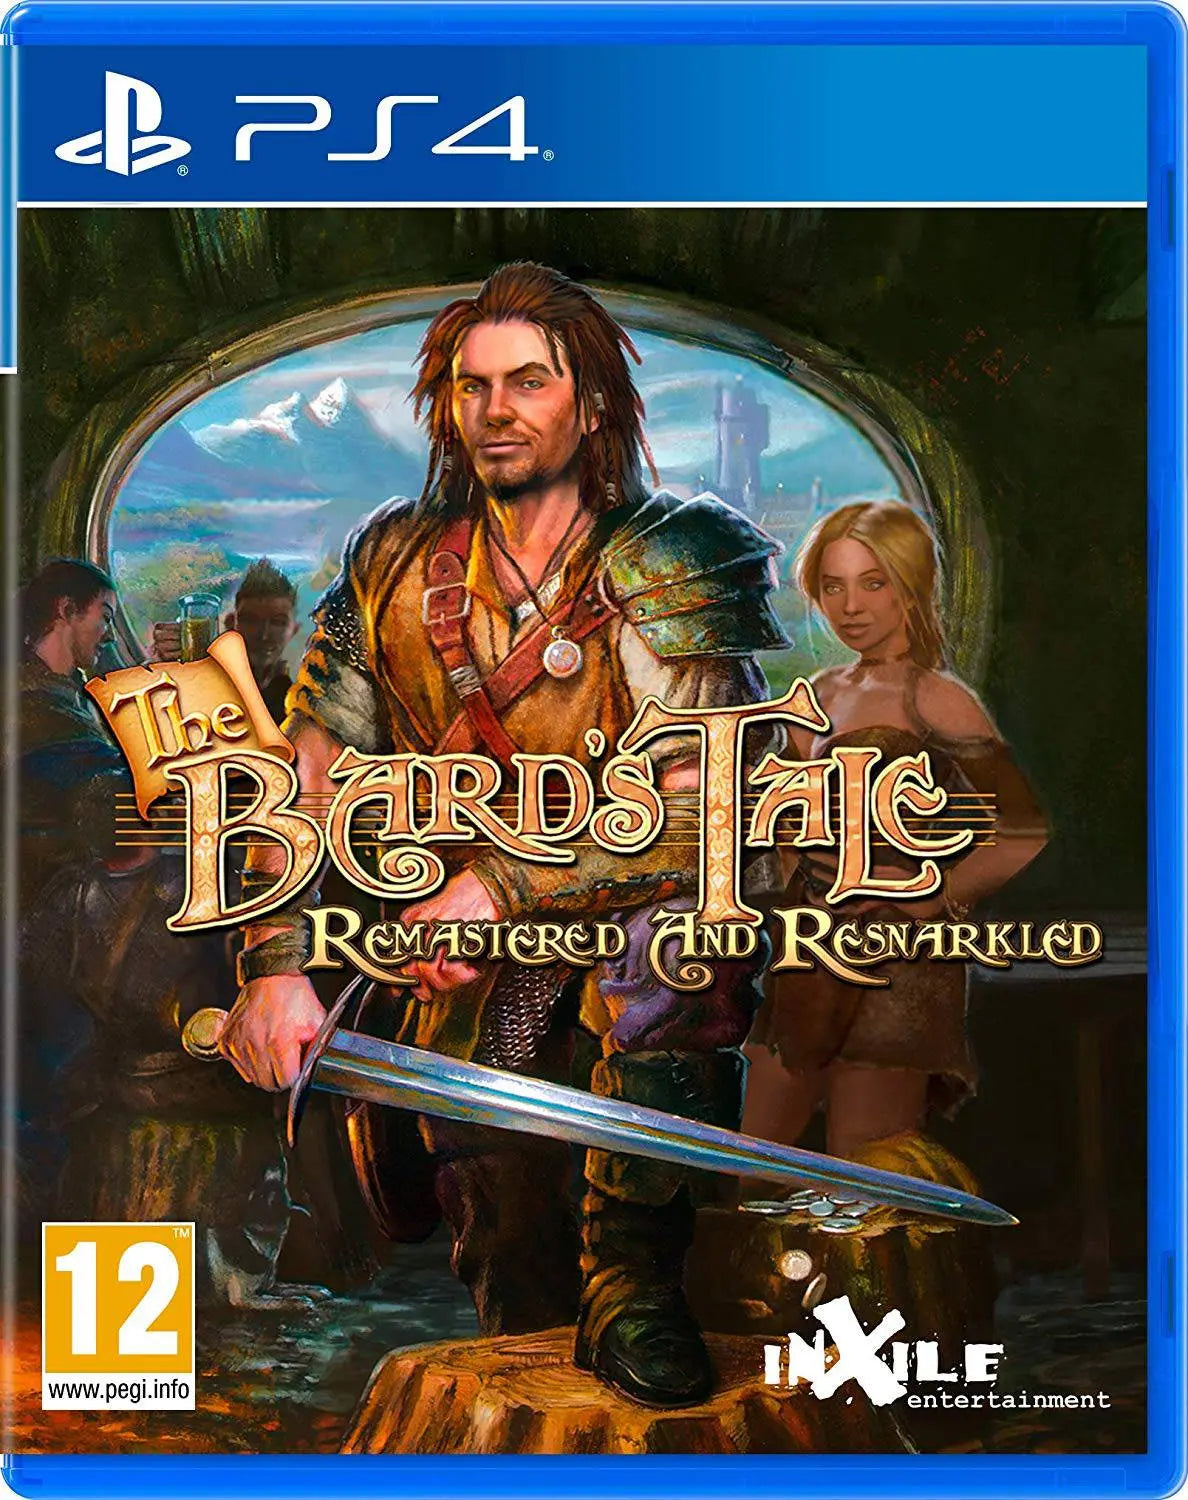 The Bard's Tale: Remastered and Resnarkled PS4 (Region Free) - Used King Gaming